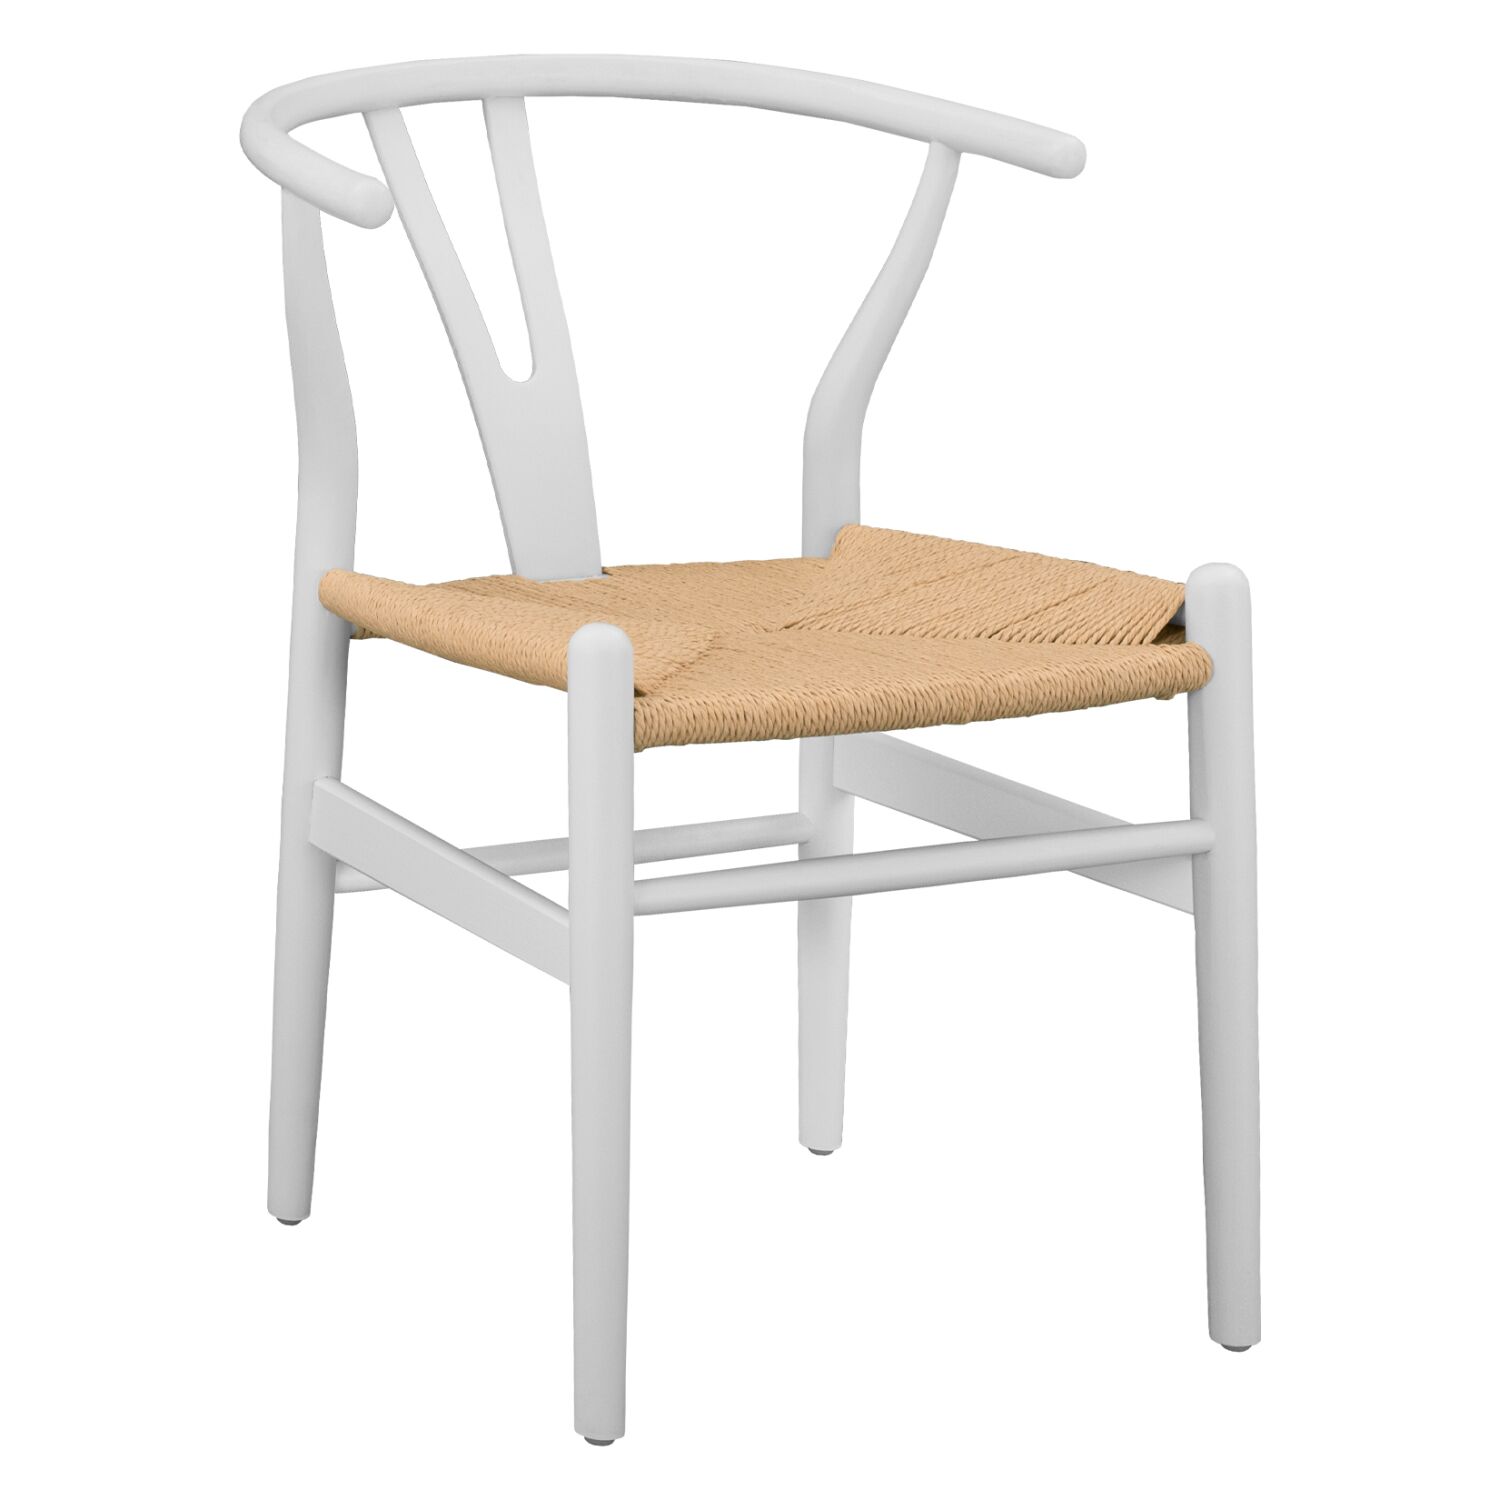 DINING CHAIR BRAVE HM8695.04 BEECH WOOD IN WHITE-ROPE BEIGE 54x57x74Hcm